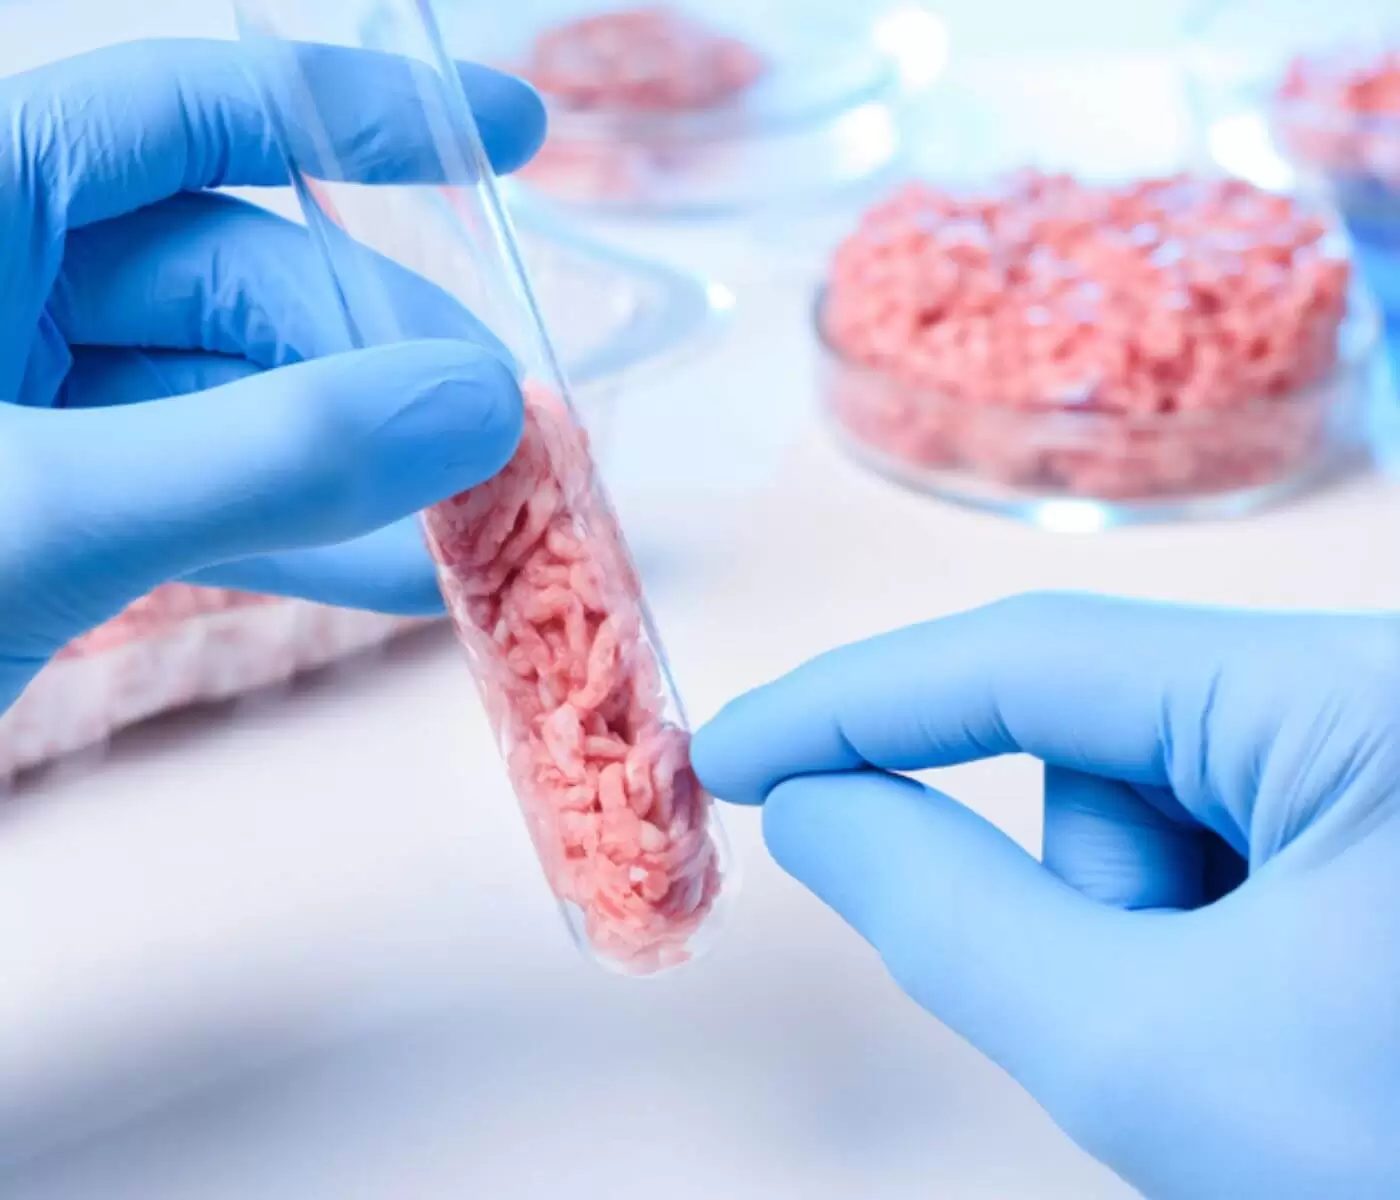 Italy says NO to lab-grown meat and synthetic food